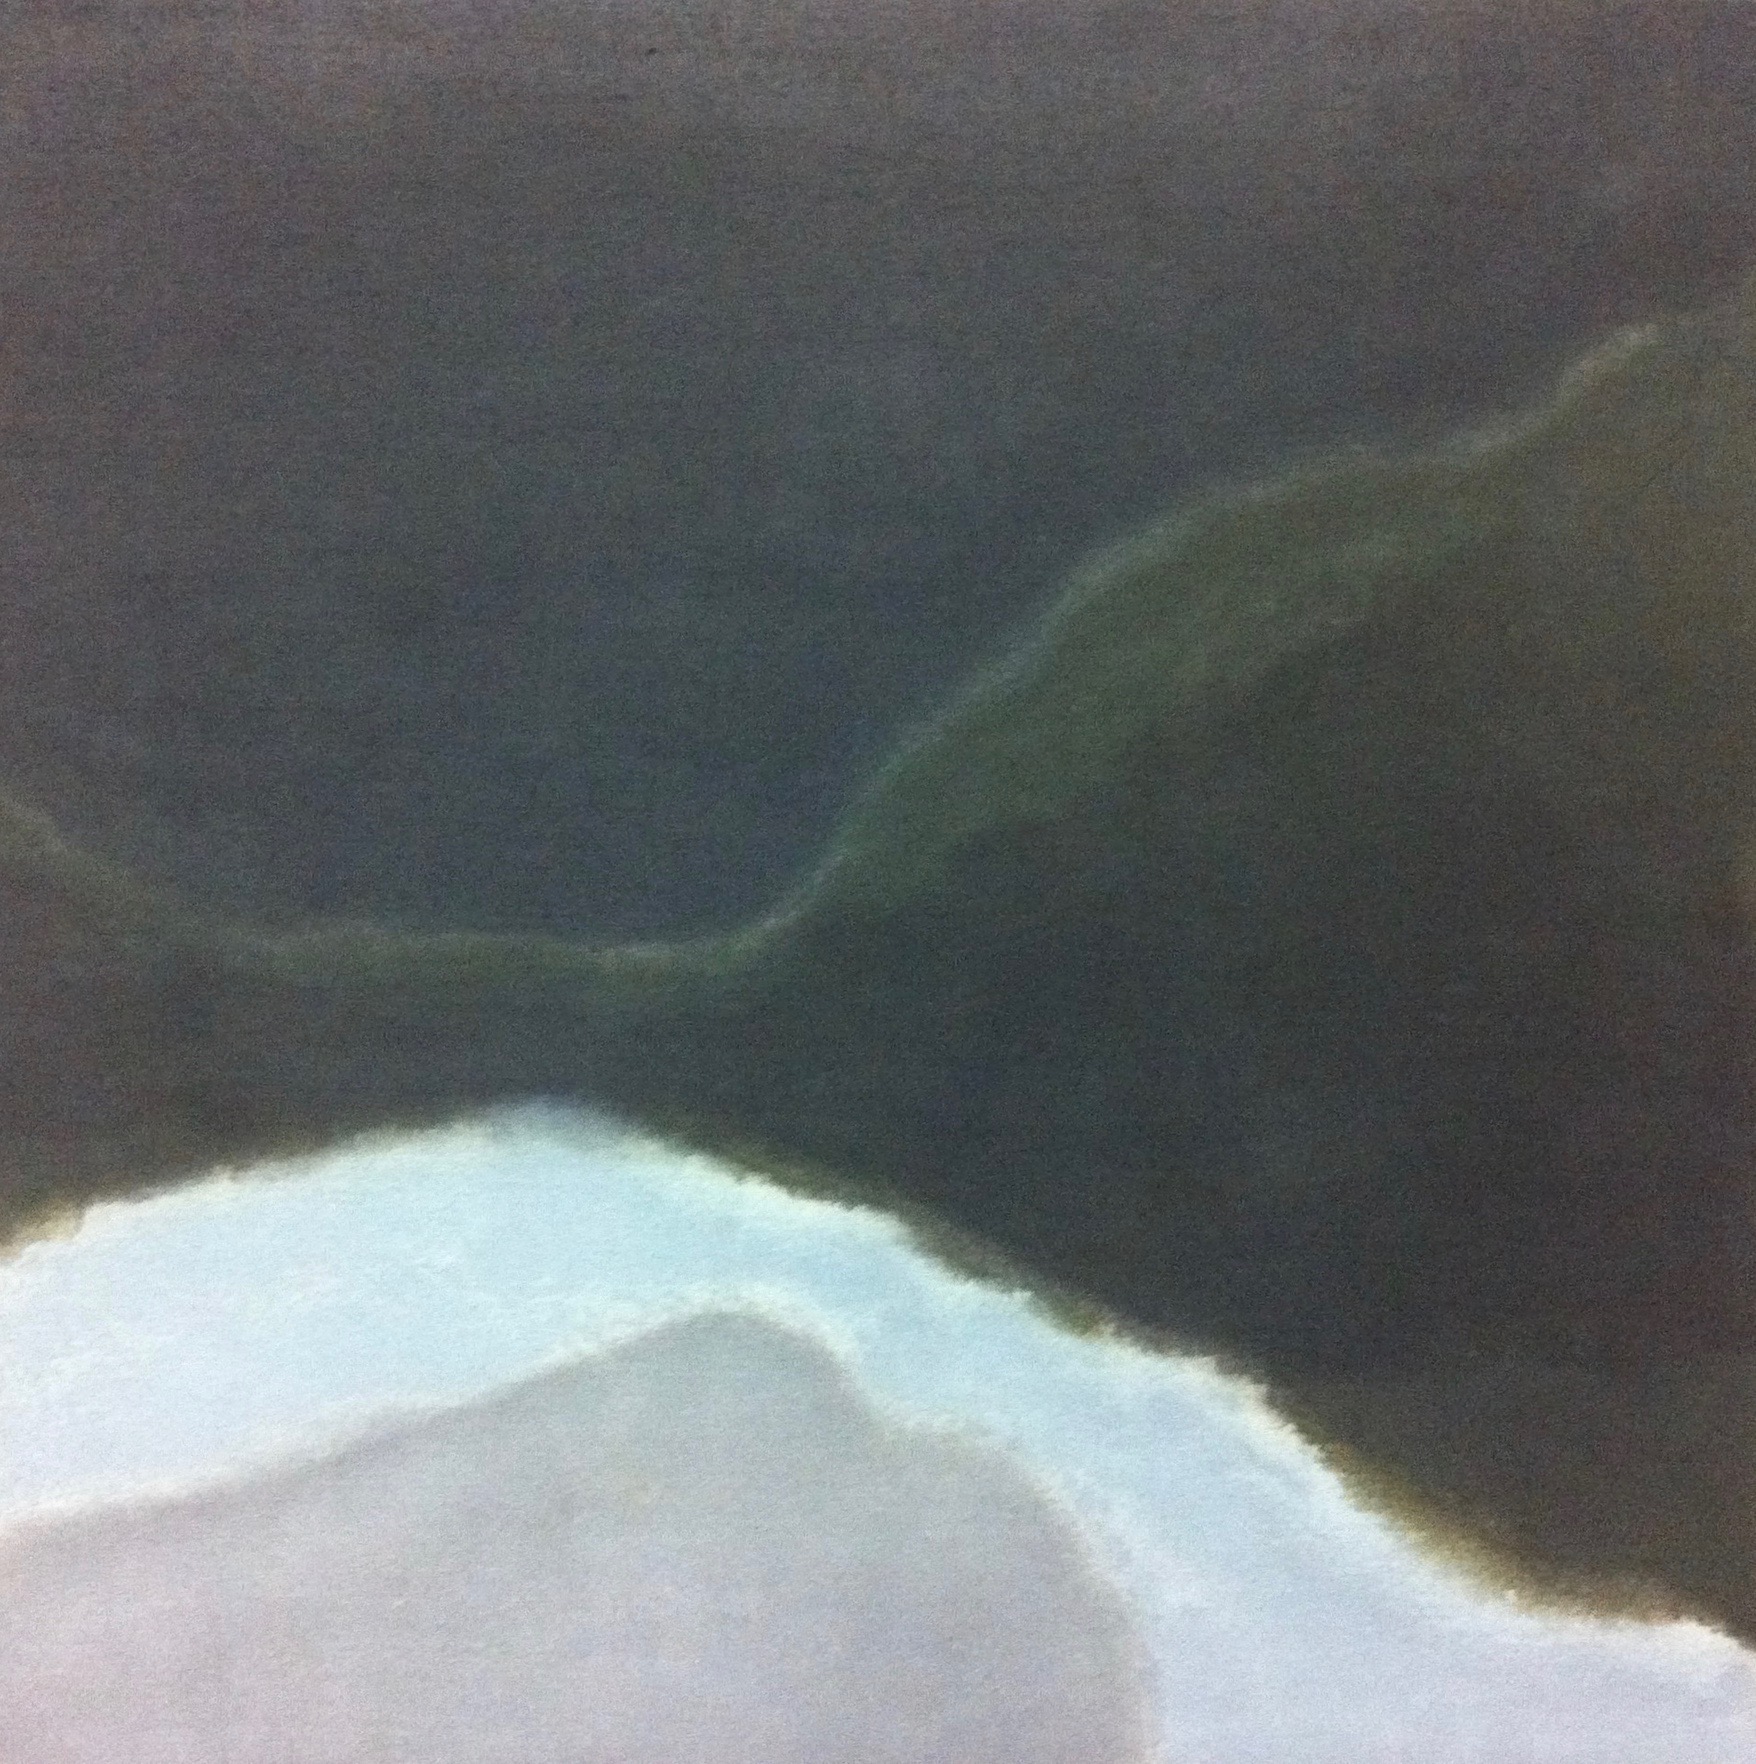  Untitled (Nocturne), 2012. Oil on Linen, 35.5 x 35.5 inches. Private Collection. 